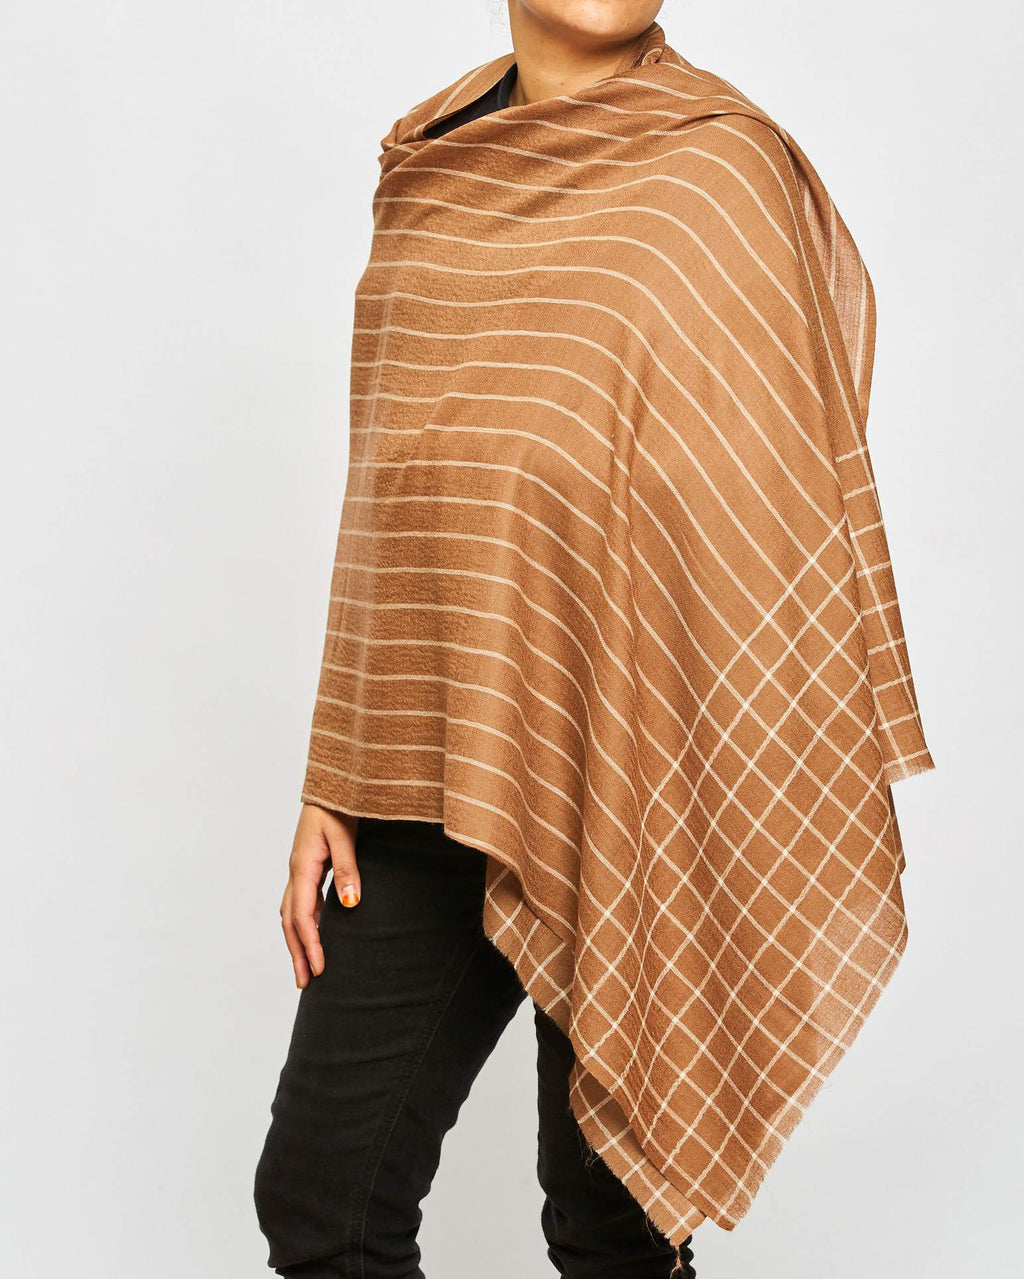 Cashmere Scarf Patterned - Brown/White Stripe